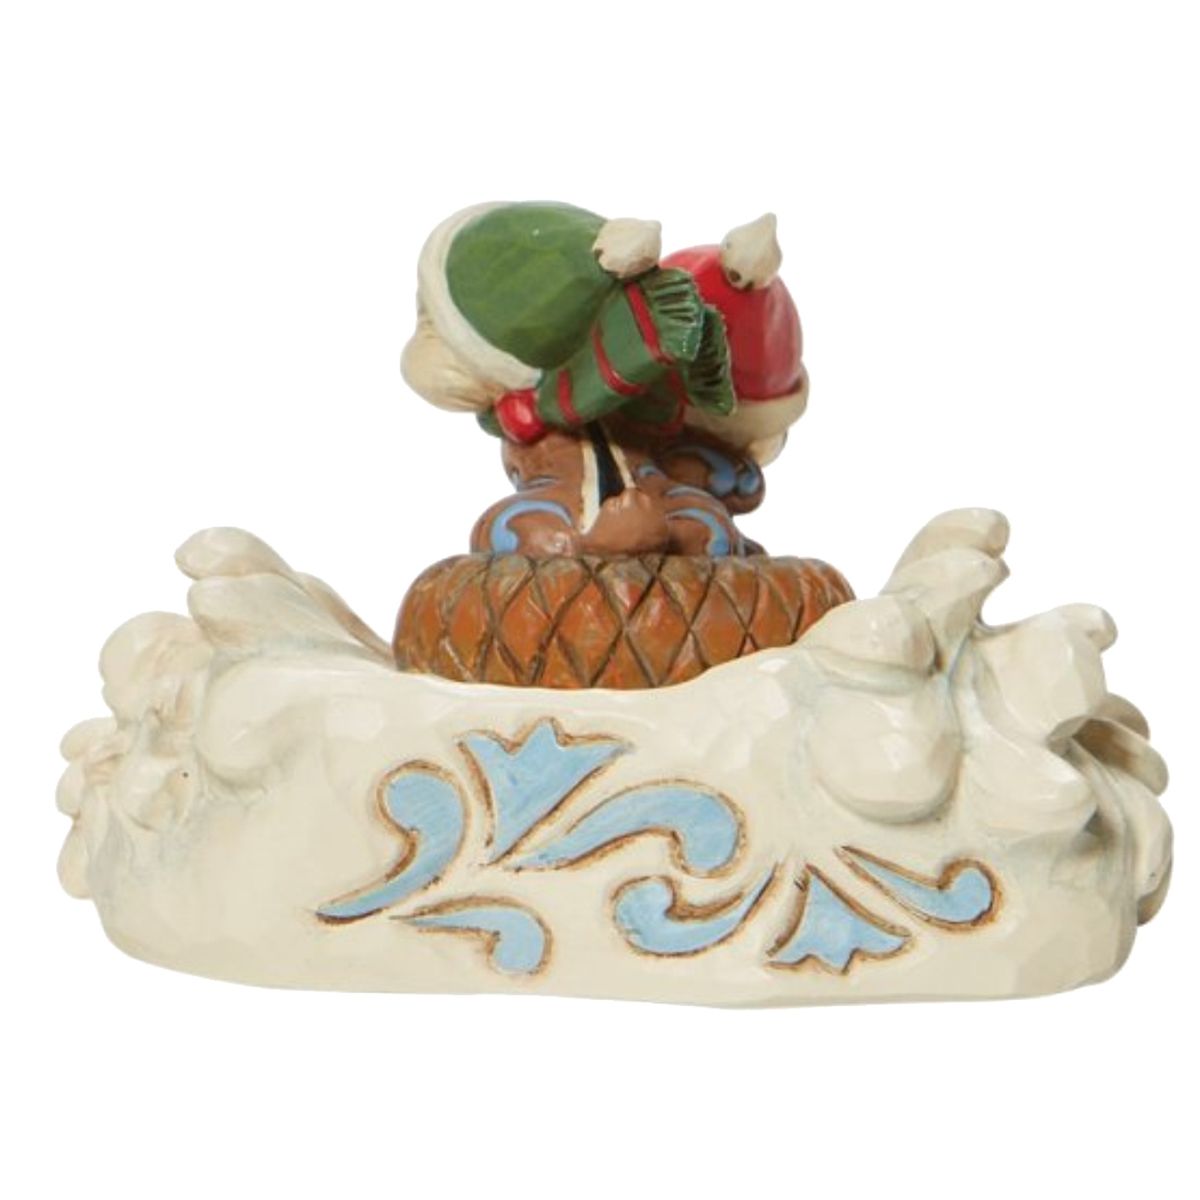 Fun in the Snow - Chip and Dale Sledding Figurine